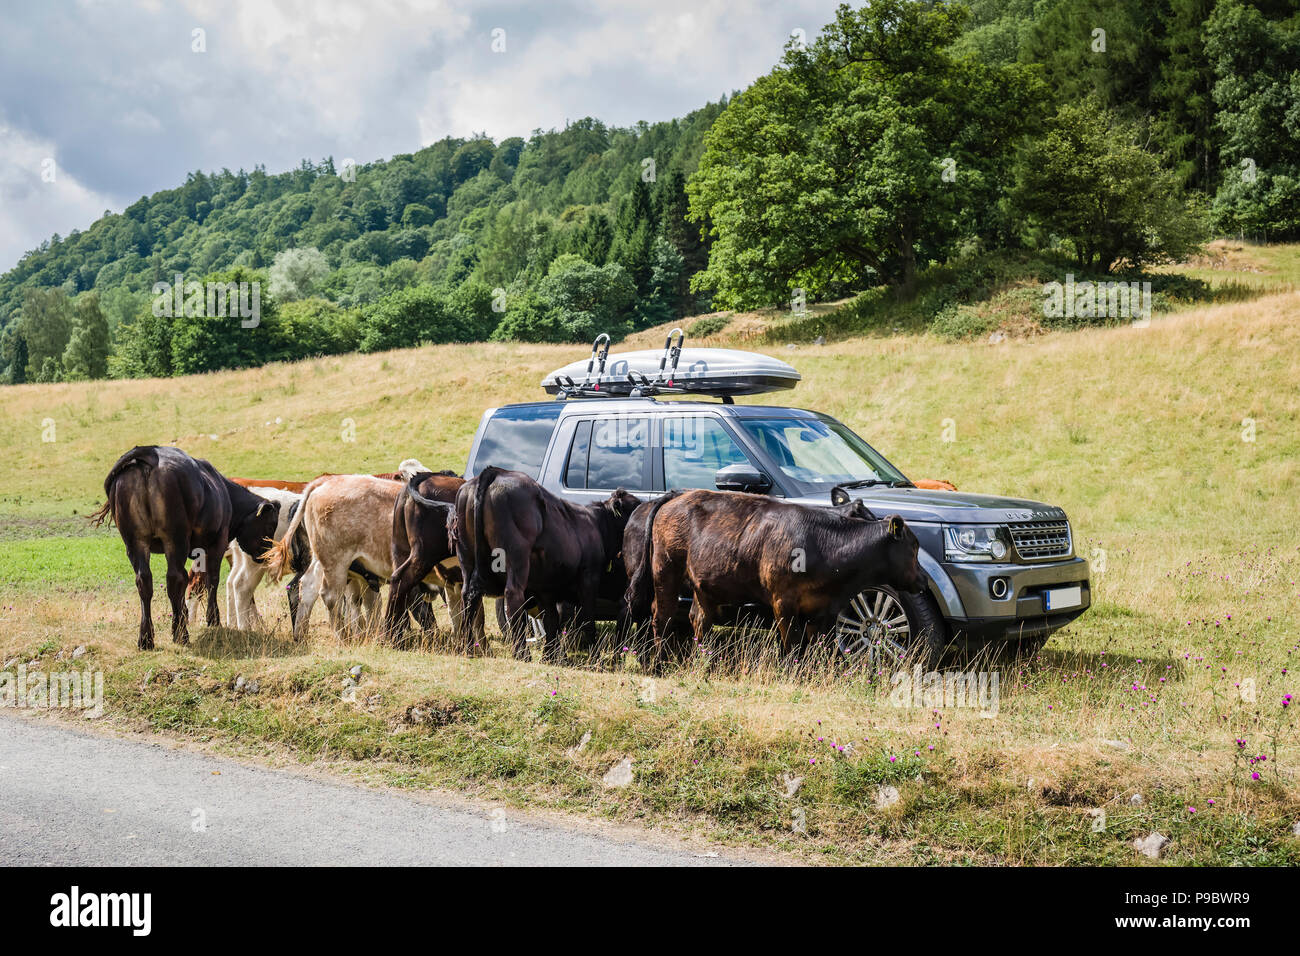 Range Rover Discovery surrounded by cattle in a field. Stock Photo